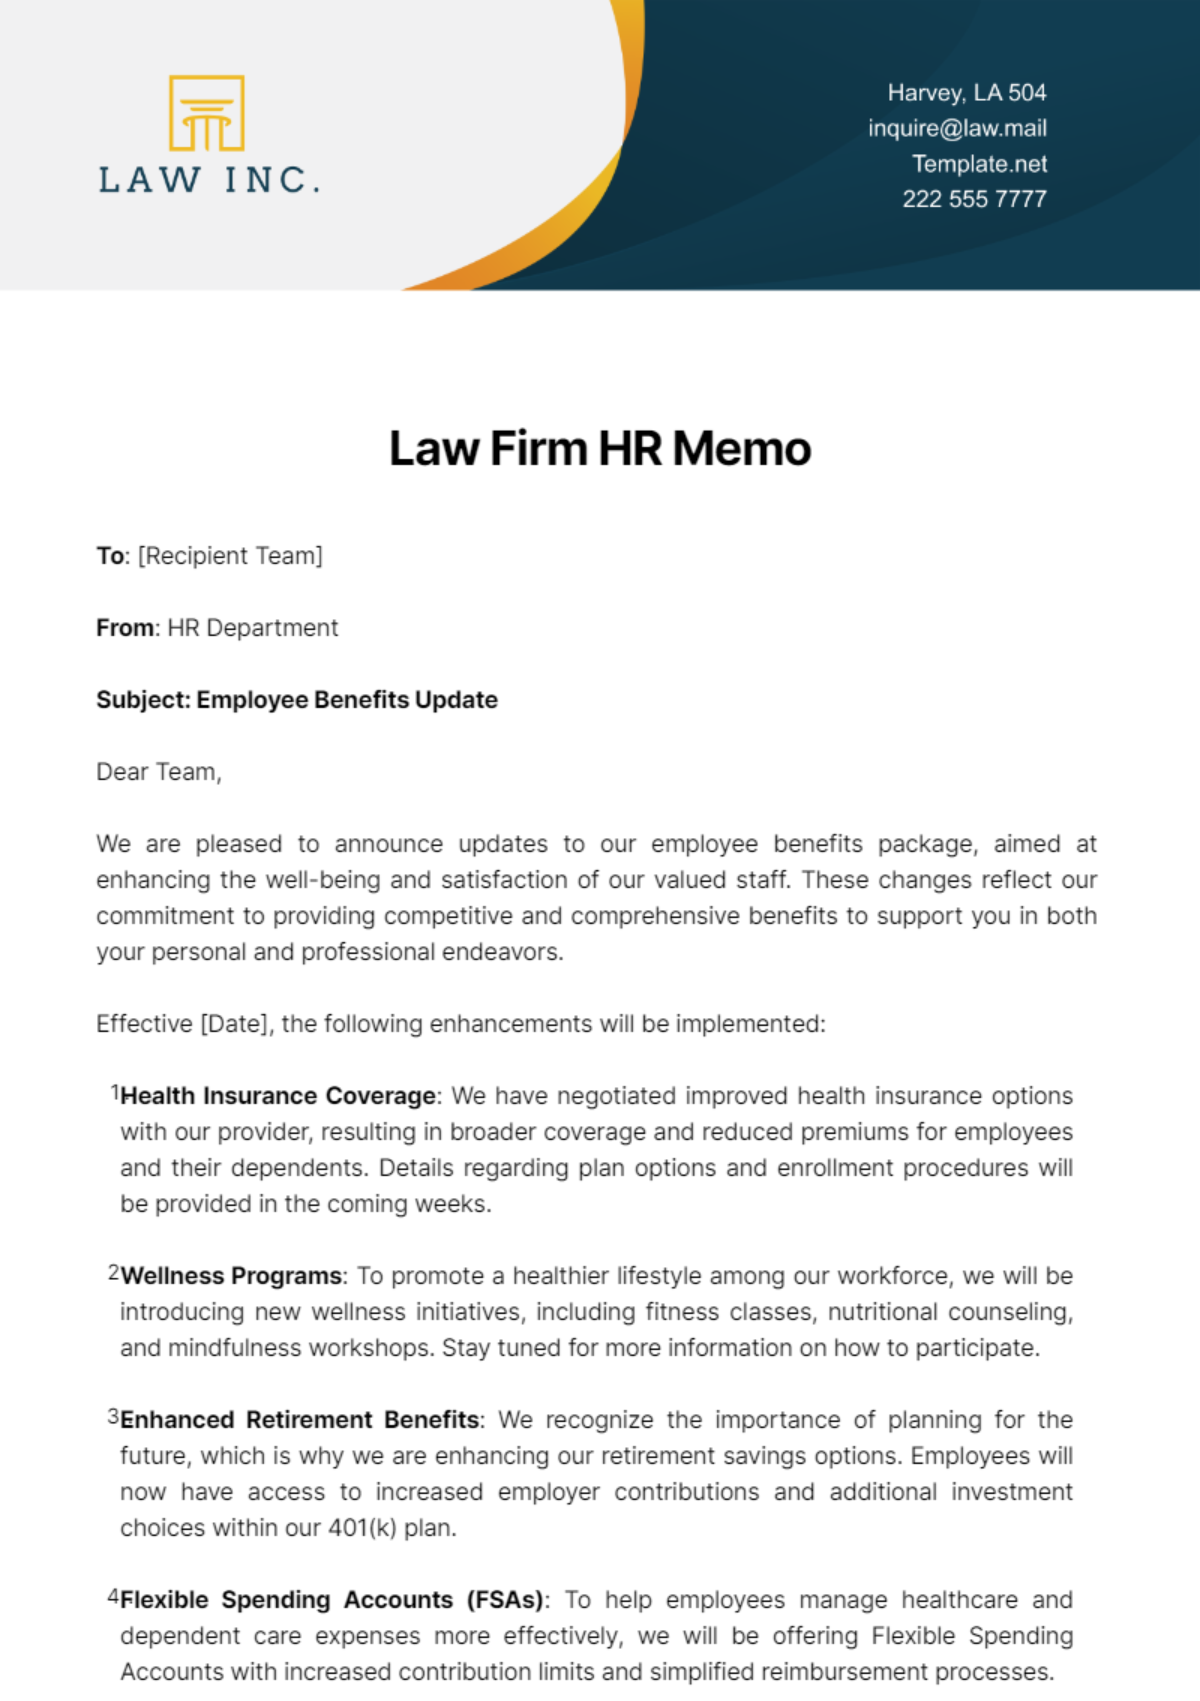 Law Firm HR Memo Template